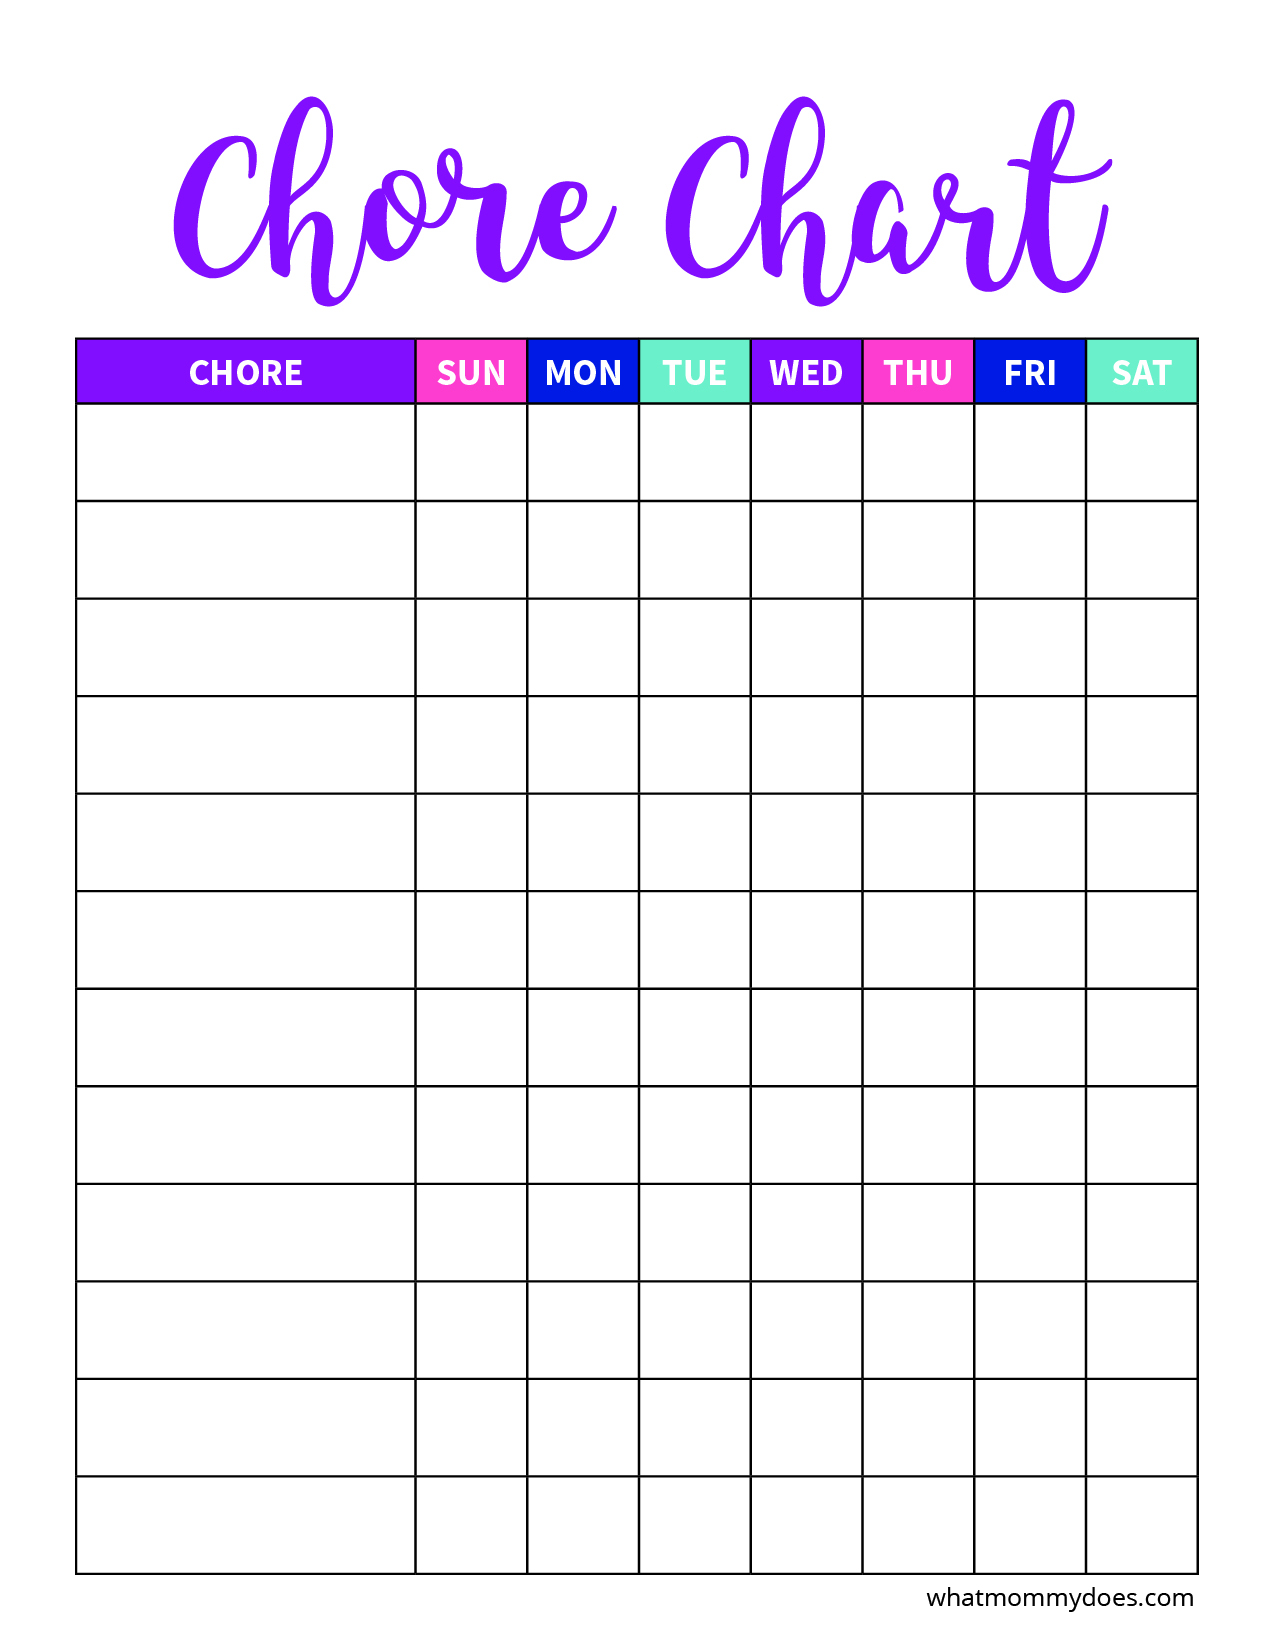 Chores Chart Printable | Template Business PSD, Excel, Word, PDF